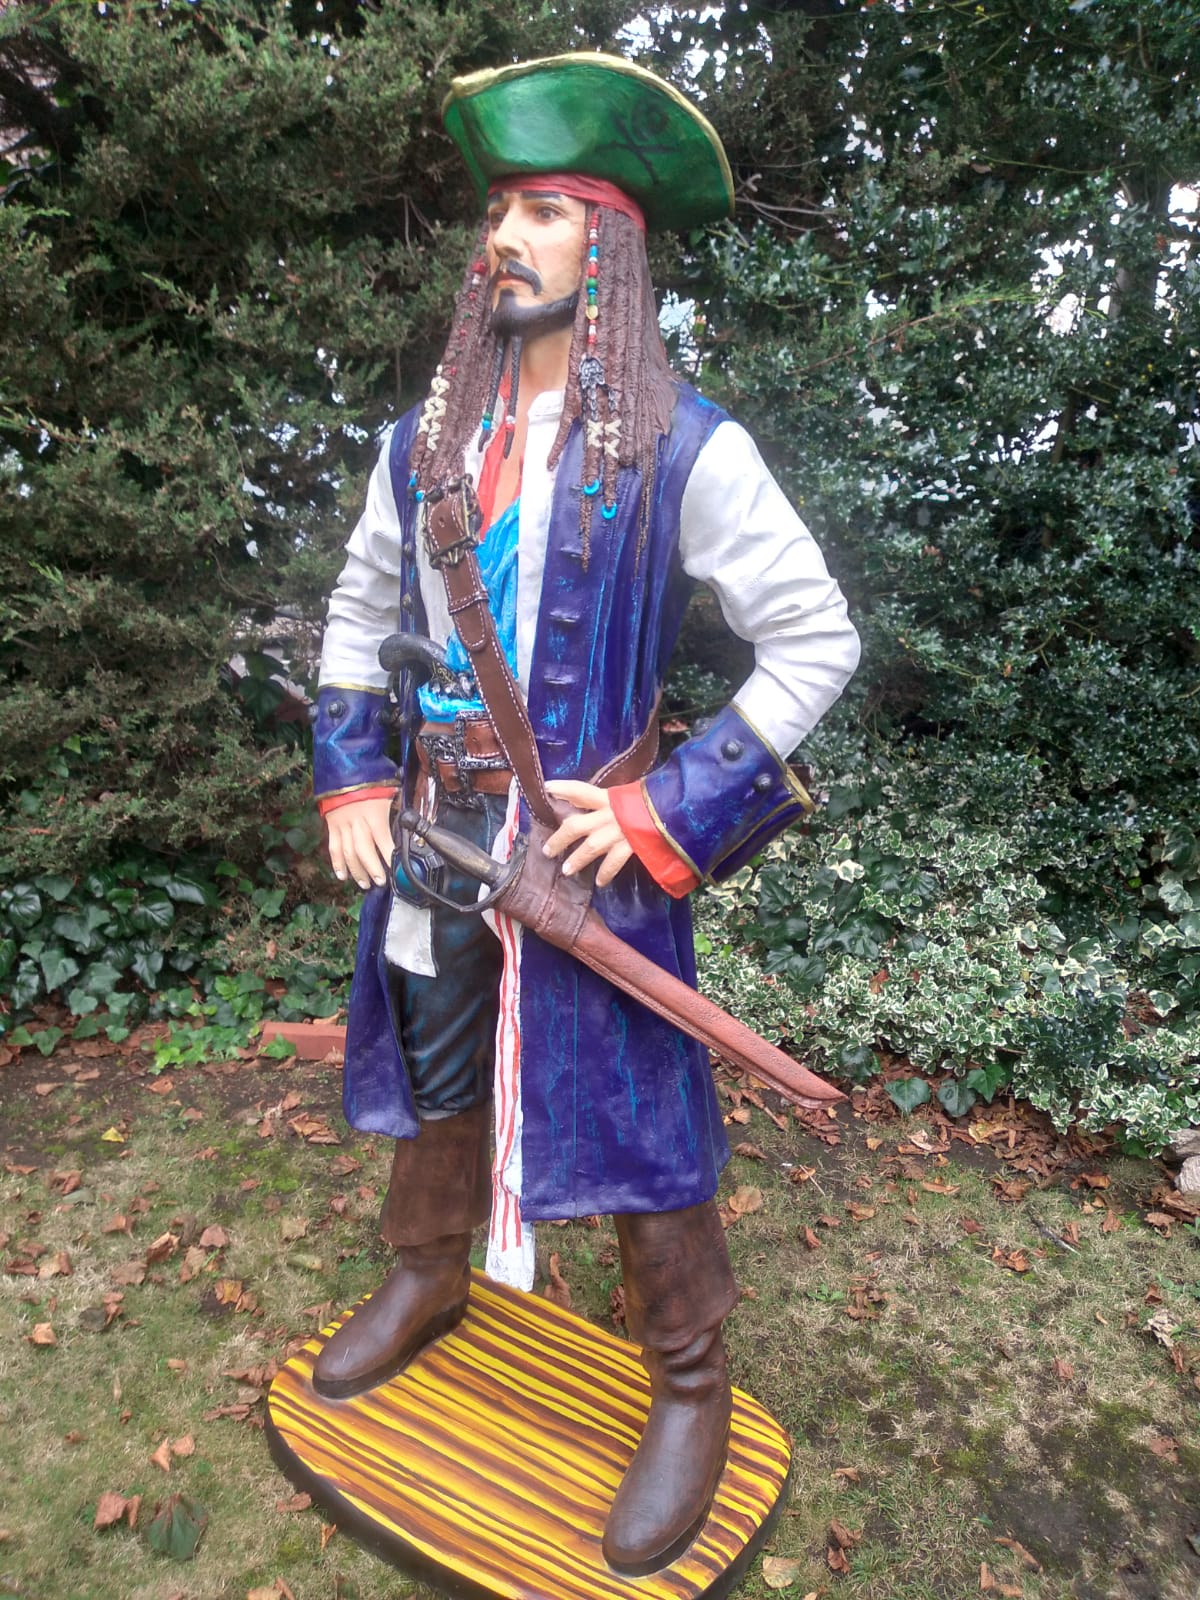 WITHDRAWN DUE TO DAMAGE IN TRANSIT Cinema - Statue of the Caribbean pirate Jack Sparr - Image 4 of 11